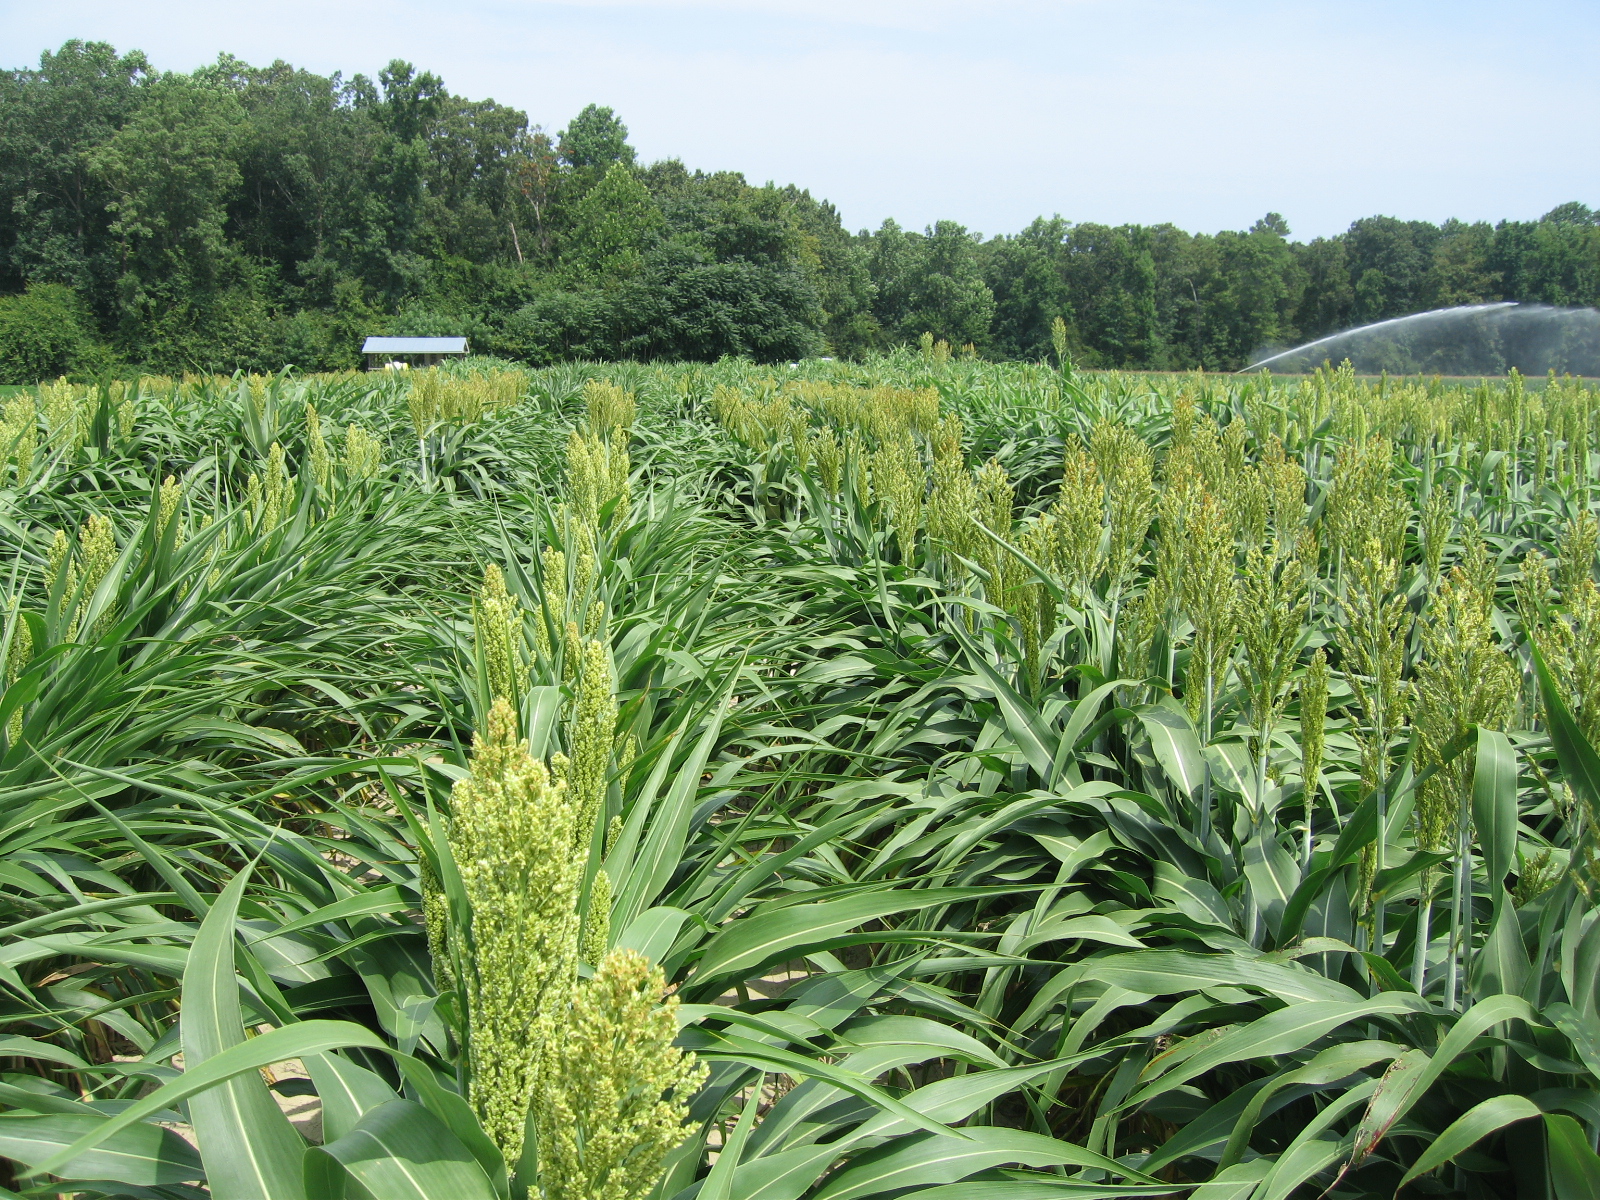 Sorghum field at beginning flowering stage and when application of Headline for anthracnose control should be made.